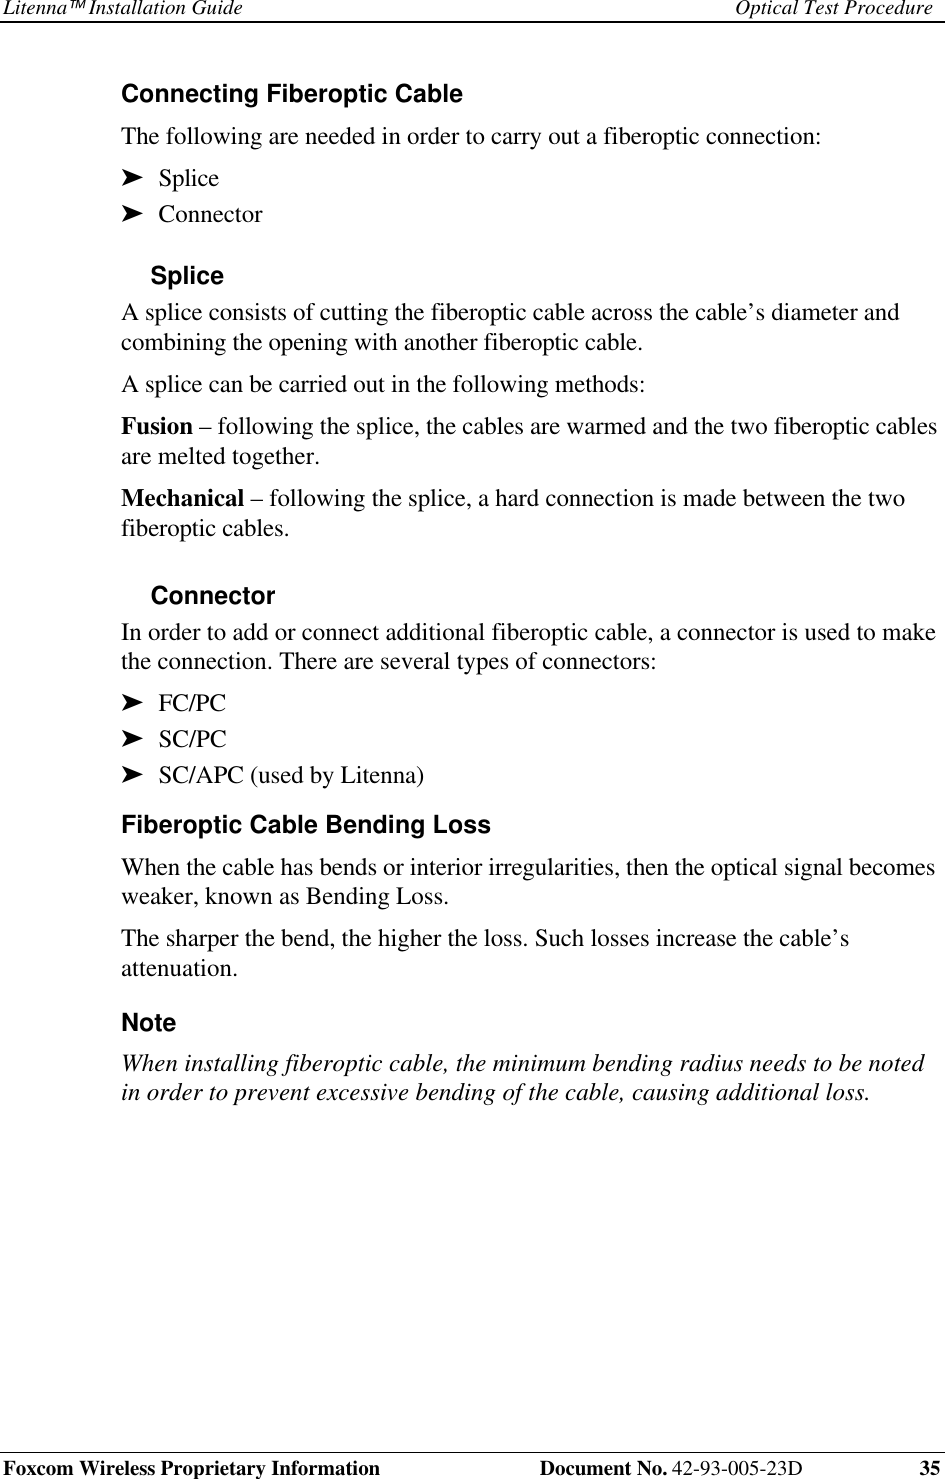 Litenna Installation Guide Optical Test ProcedureFoxcom Wireless Proprietary Information  Document No. 42-93-005-23D 35Connecting Fiberoptic Cable The following are needed in order to carry out a fiberoptic connection:➤  Splice➤  ConnectorSplice A splice consists of cutting the fiberoptic cable across the cable’s diameter andcombining the opening with another fiberoptic cable. A splice can be carried out in the following methods: Fusion – following the splice, the cables are warmed and the two fiberoptic cablesare melted together. Mechanical – following the splice, a hard connection is made between the twofiberoptic cables.Connector In order to add or connect additional fiberoptic cable, a connector is used to makethe connection. There are several types of connectors:➤  FC/PC➤  SC/PC➤  SC/APC (used by Litenna)Fiberoptic Cable Bending Loss When the cable has bends or interior irregularities, then the optical signal becomesweaker, known as Bending Loss. The sharper the bend, the higher the loss. Such losses increase the cable’sattenuation. Note When installing fiberoptic cable, the minimum bending radius needs to be notedin order to prevent excessive bending of the cable, causing additional loss.  